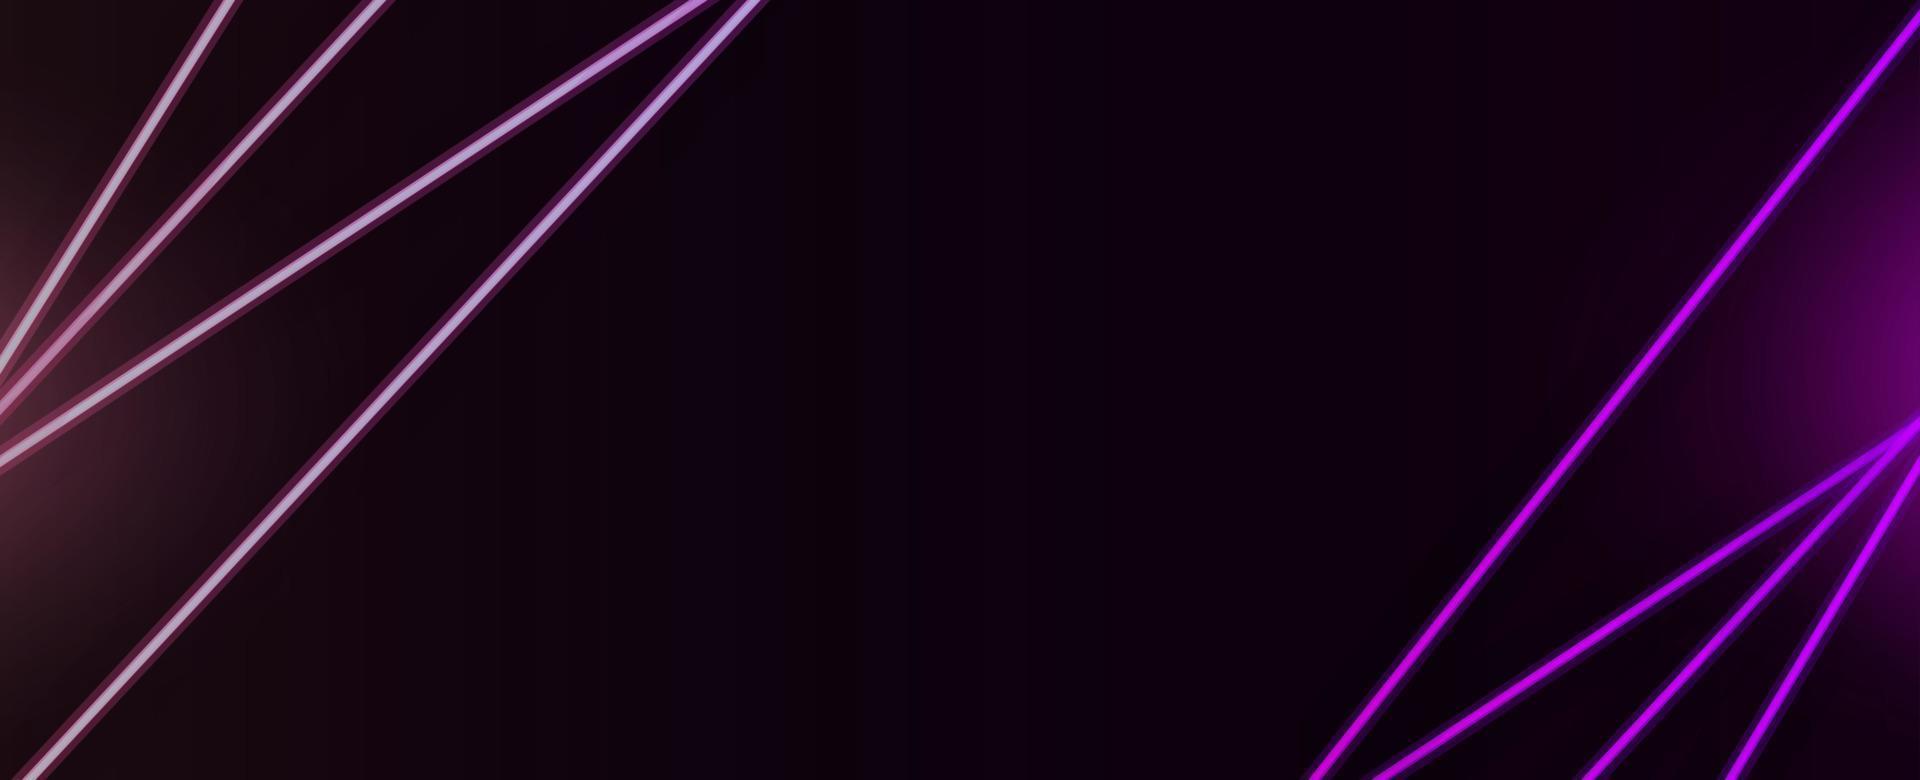 Abstract geometric neon lines dark illustration banner pattern background vector